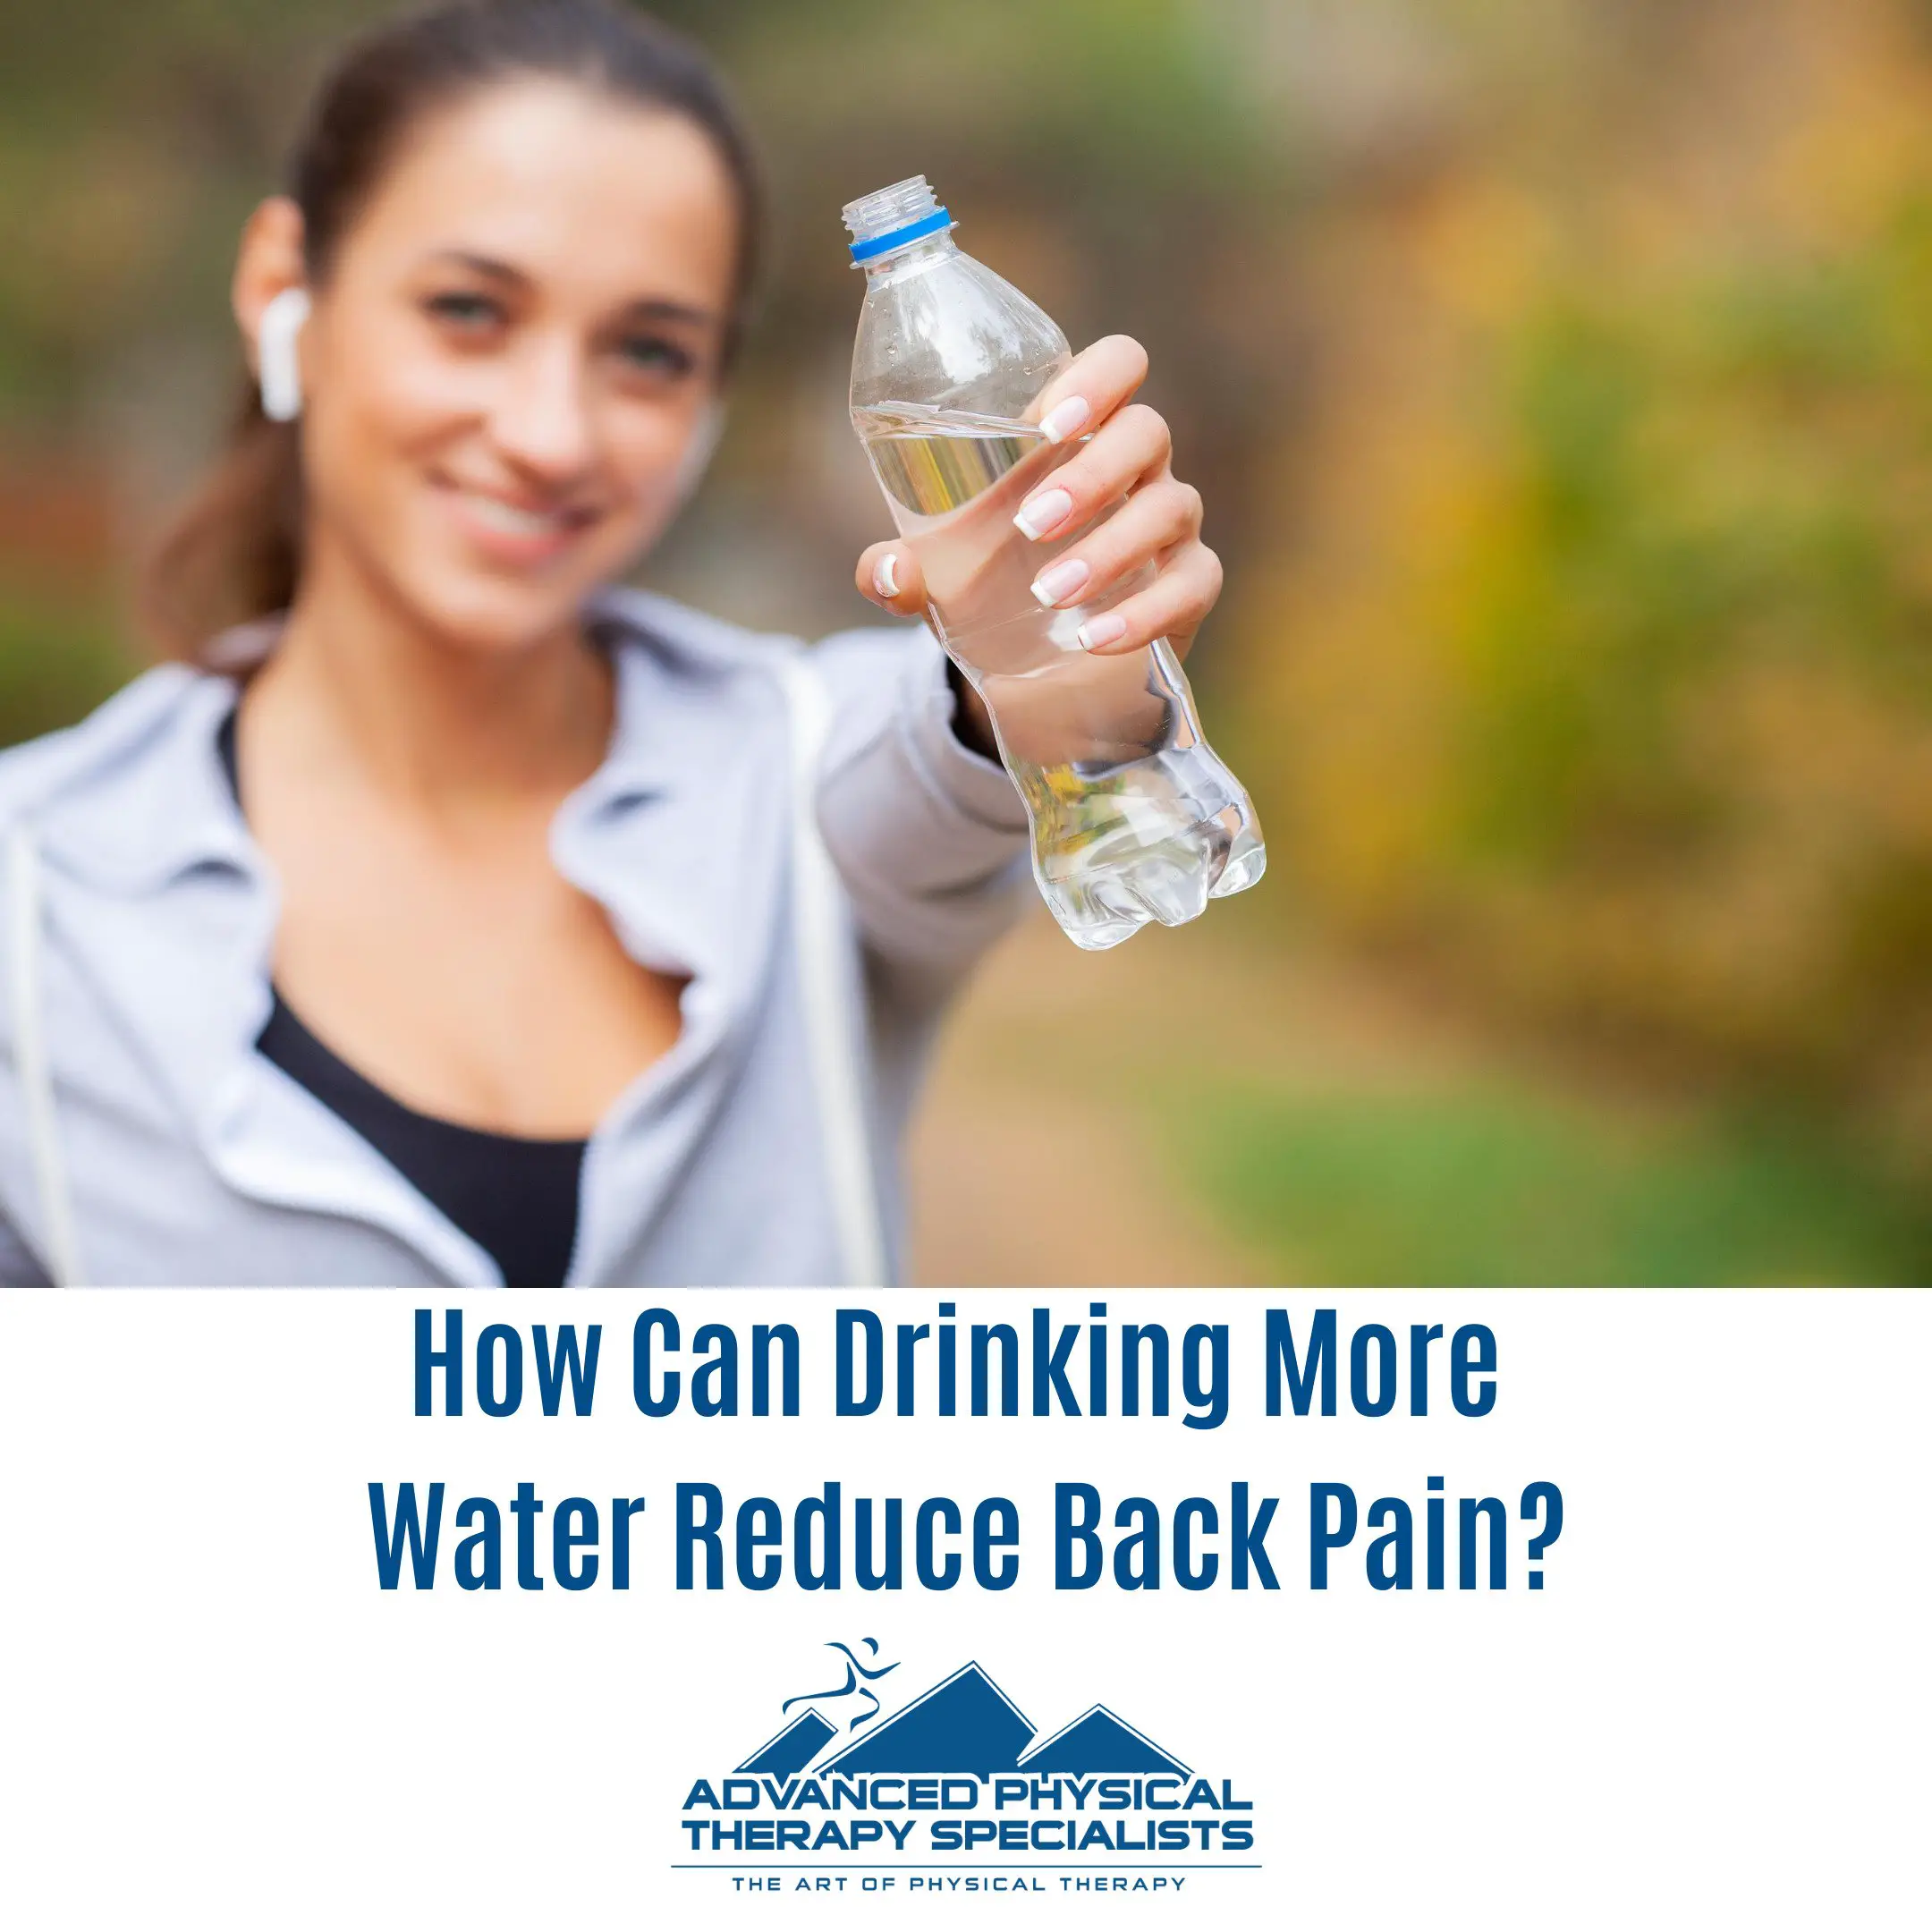 How Can Drinking More Water Reduce Back Pain?